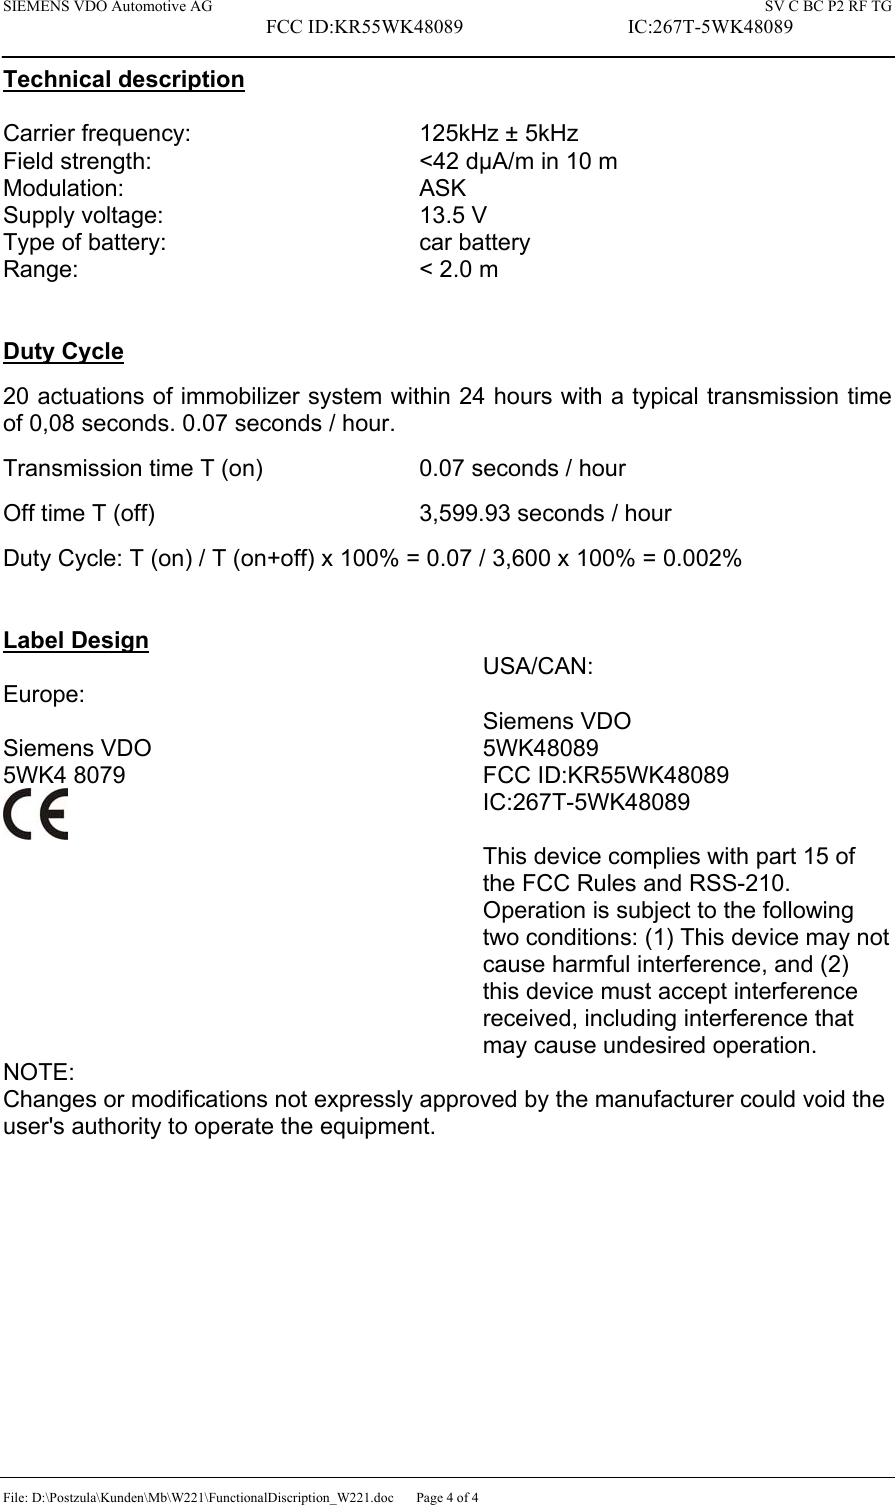 SIEMENS VDO Automotive AG    SV C BC P2 RF TG FCC ID:KR55WK48089  IC:267T-5WK48089 File: D:\Postzula\Kunden\Mb\W221\FunctionalDiscription_W221.doc  Page 4 of 4 Technical description  Carrier frequency:    125kHz ± 5kHz Field strength:        &lt;42 dµA/m in 10 m Modulation:     ASK Supply voltage:    13.5 V Type of battery:    car battery Range:     &lt; 2.0 m   Duty Cycle  20 actuations of immobilizer system within 24 hours with a typical transmission time of 0,08 seconds. 0.07 seconds / hour.  Transmission time T (on)      0.07 seconds / hour  Off time T (off)        3,599.93 seconds / hour  Duty Cycle: T (on) / T (on+off) x 100% = 0.07 / 3,600 x 100% = 0.002%   Label Design  Europe:  Siemens VDO 5WK4 8079   USA/CAN:  Siemens VDO 5WK48089 FCC ID:KR55WK48089 IC:267T-5WK48089  This device complies with part 15 of the FCC Rules and RSS-210. Operation is subject to the following two conditions: (1) This device may not cause harmful interference, and (2) this device must accept interference received, including interference that may cause undesired operation. NOTE: Changes or modifications not expressly approved by the manufacturer could void the user&apos;s authority to operate the equipment.  